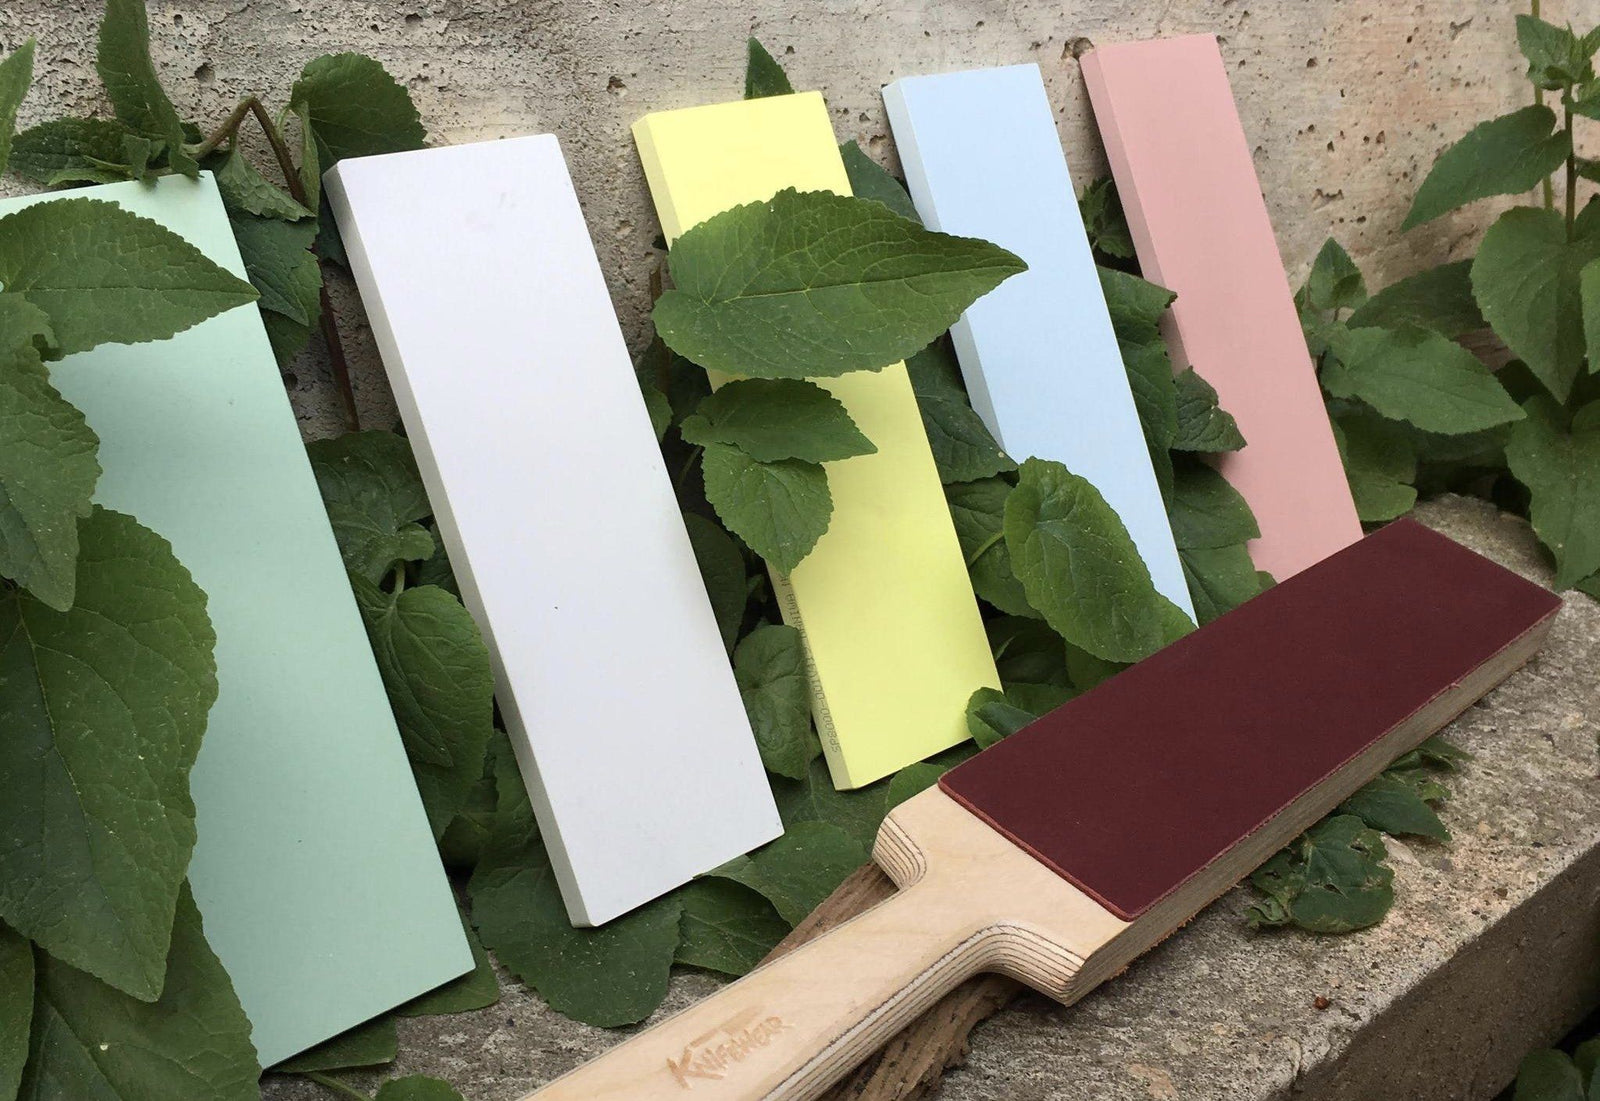 How To Mirror Polish A Knife Blade  Complete Guide - Red Label Abrasives